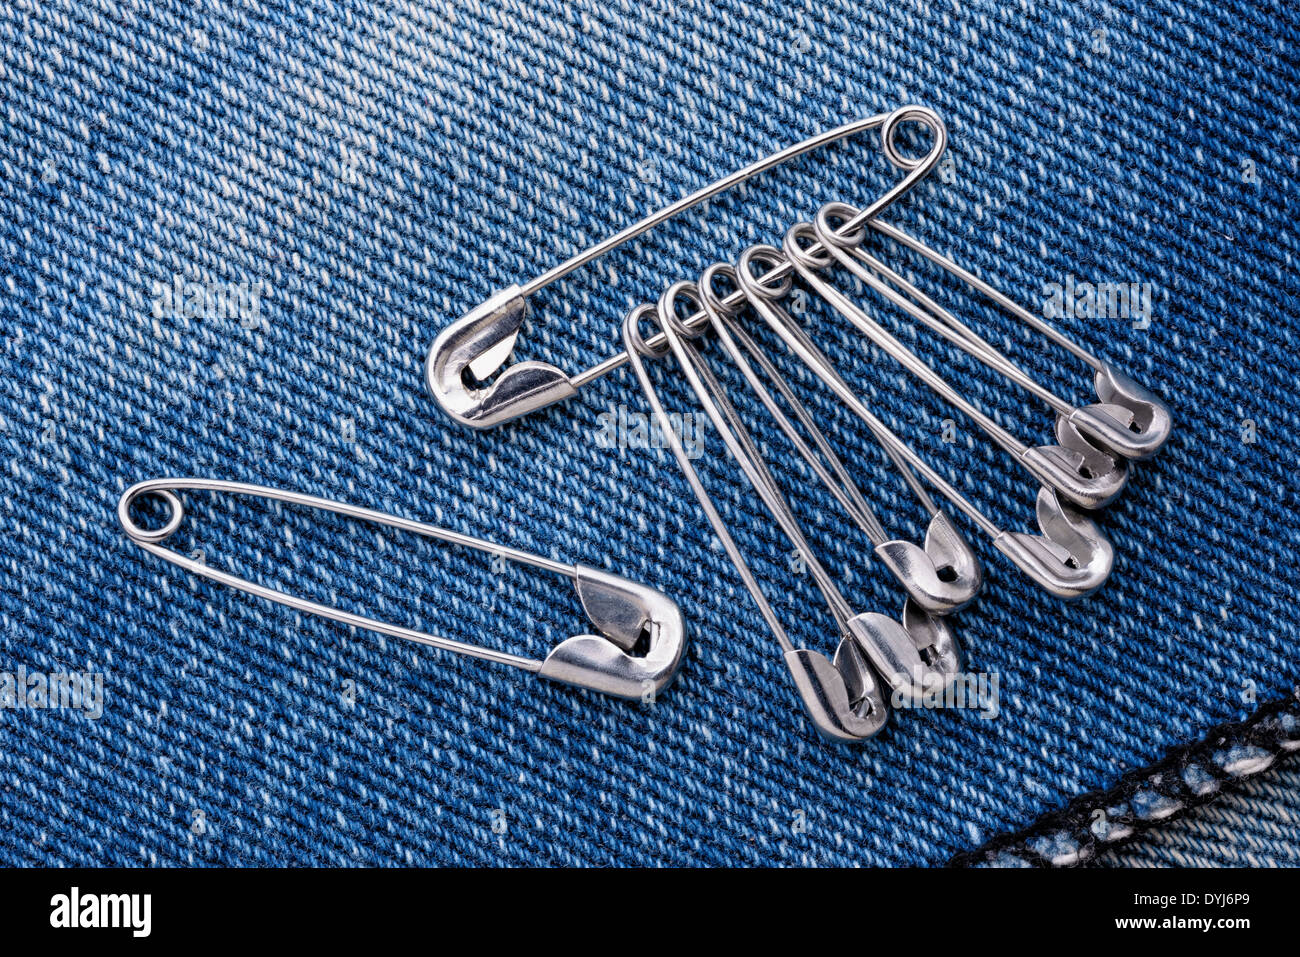 Safety Pins on Clothes with Label Stock Image - Image of close, label:  80500473